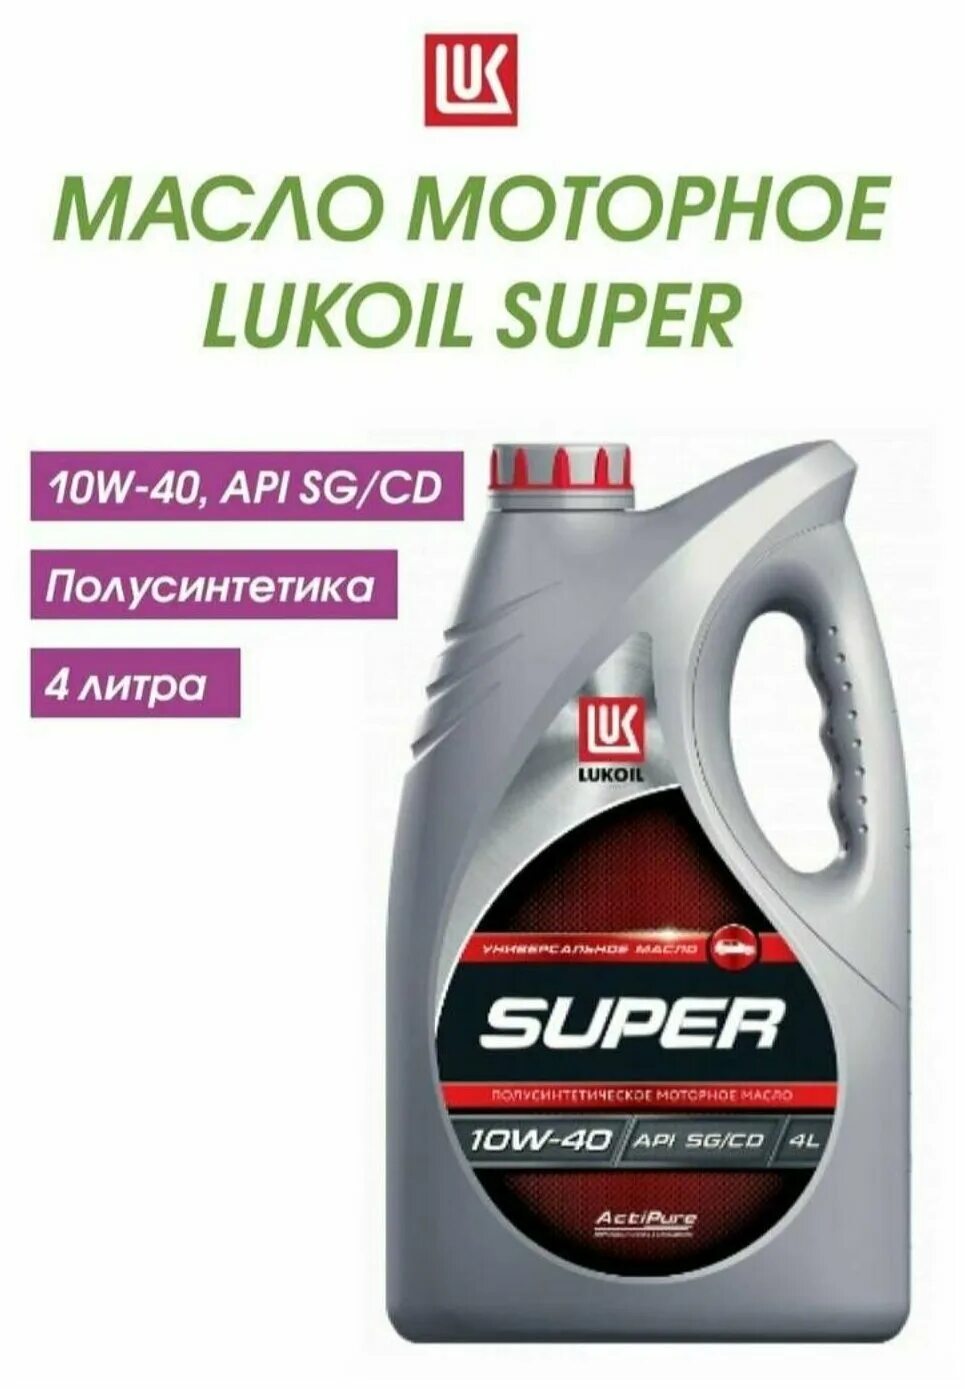 Масло моторное Лукойл 10w-40 super. Lukoil super 5w-40. Моторное масло Лукойл (Lukoil) 5w-40 полусинтетическое 4 л. Масло Лукойл супер 10w 40 полусинтетика. Цена масла 5 w 40